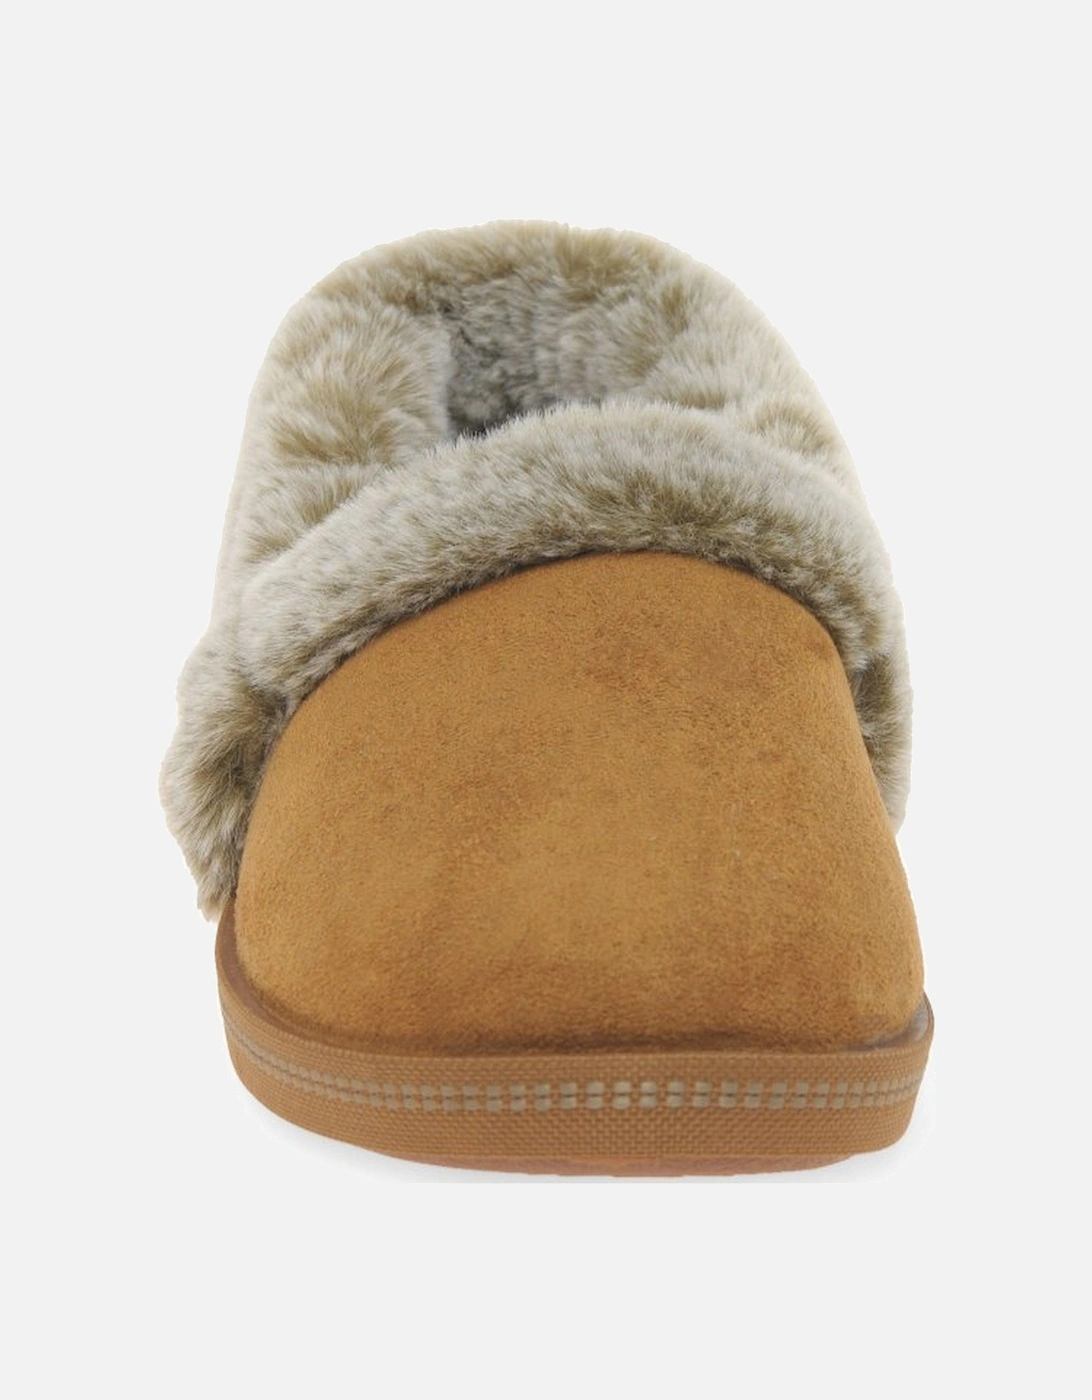 Cozy Campfire Team Toasty Womens Slippers